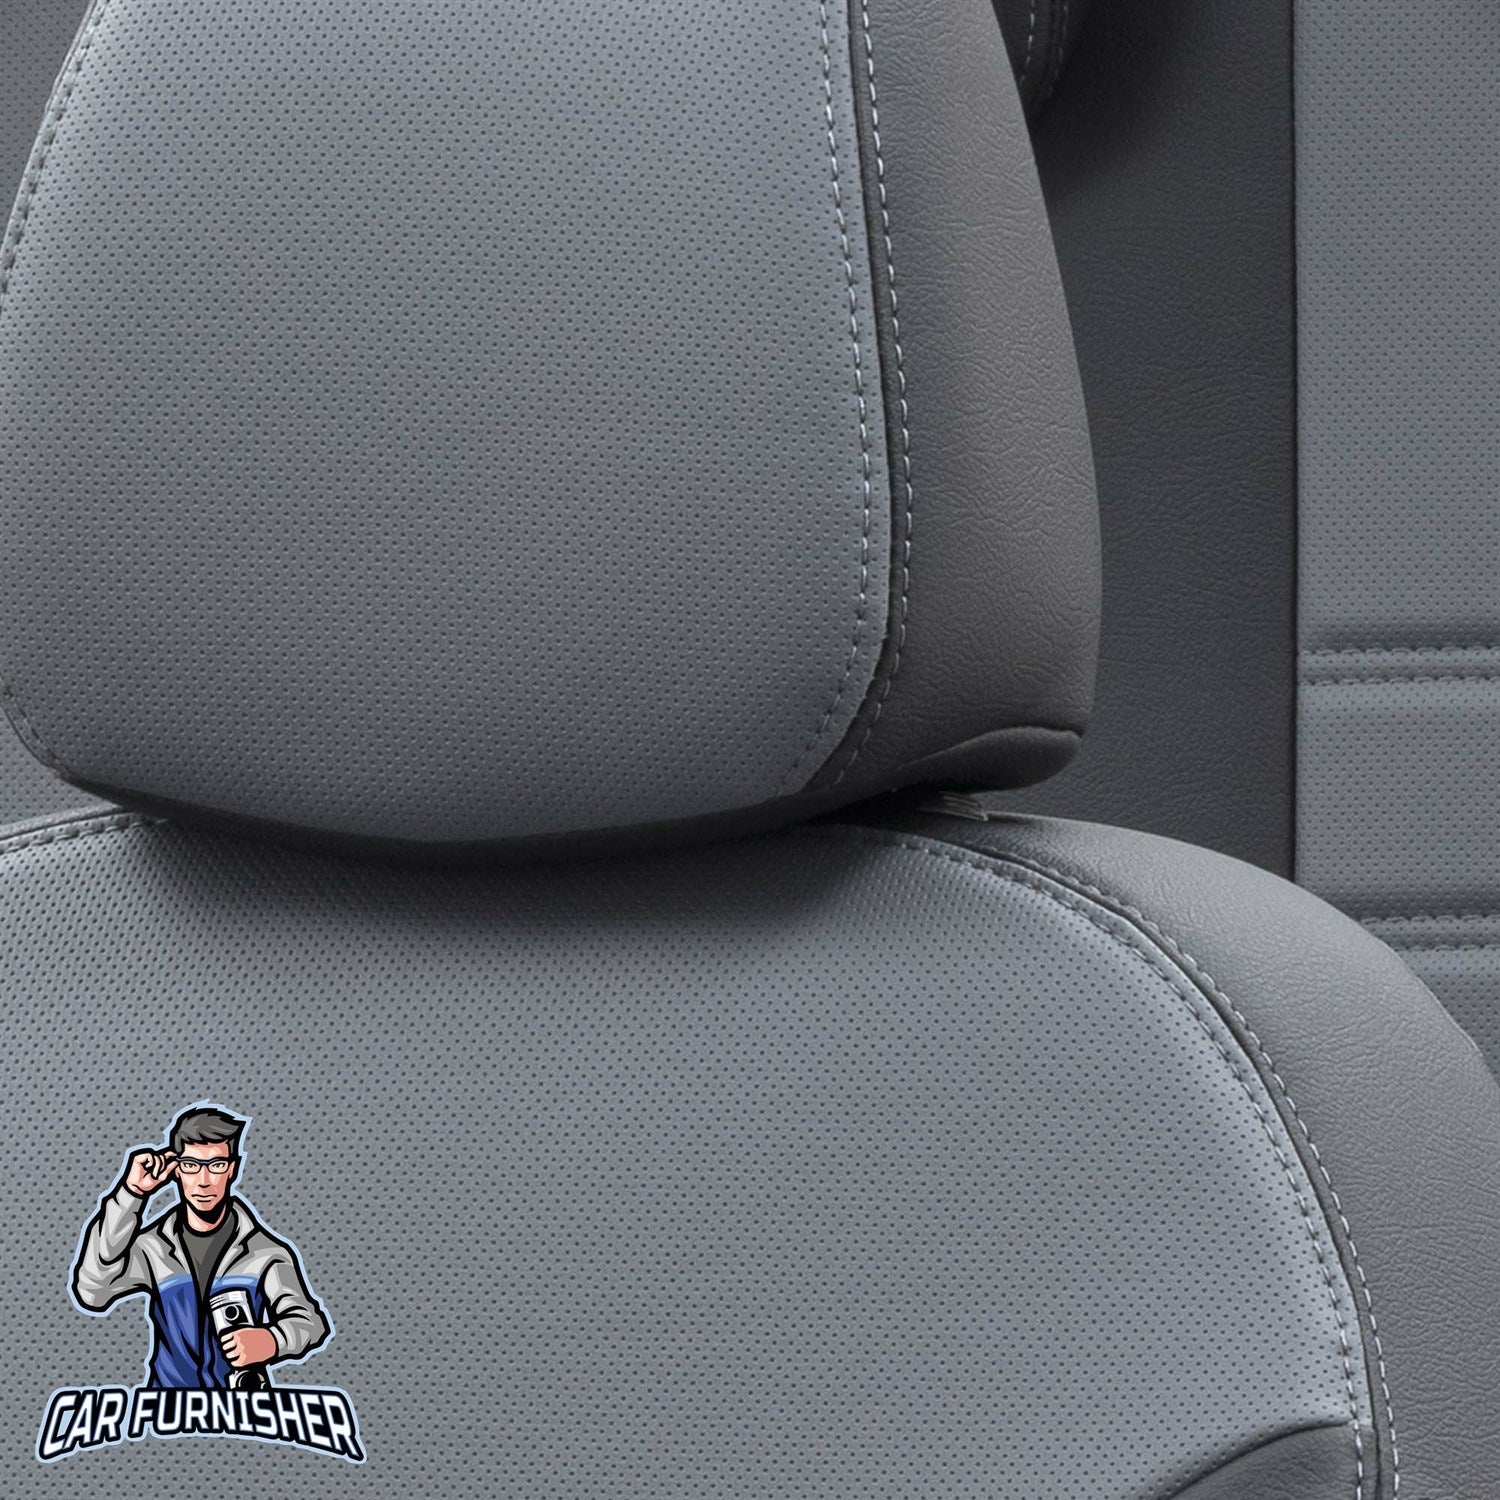 Volvo S60 Car Seat Cover 2000-2018 T4/T5/T6/T8/D5 Istanbul Design Smoked Black Full Set (5 Seats + Handrest) Leather & Fabric